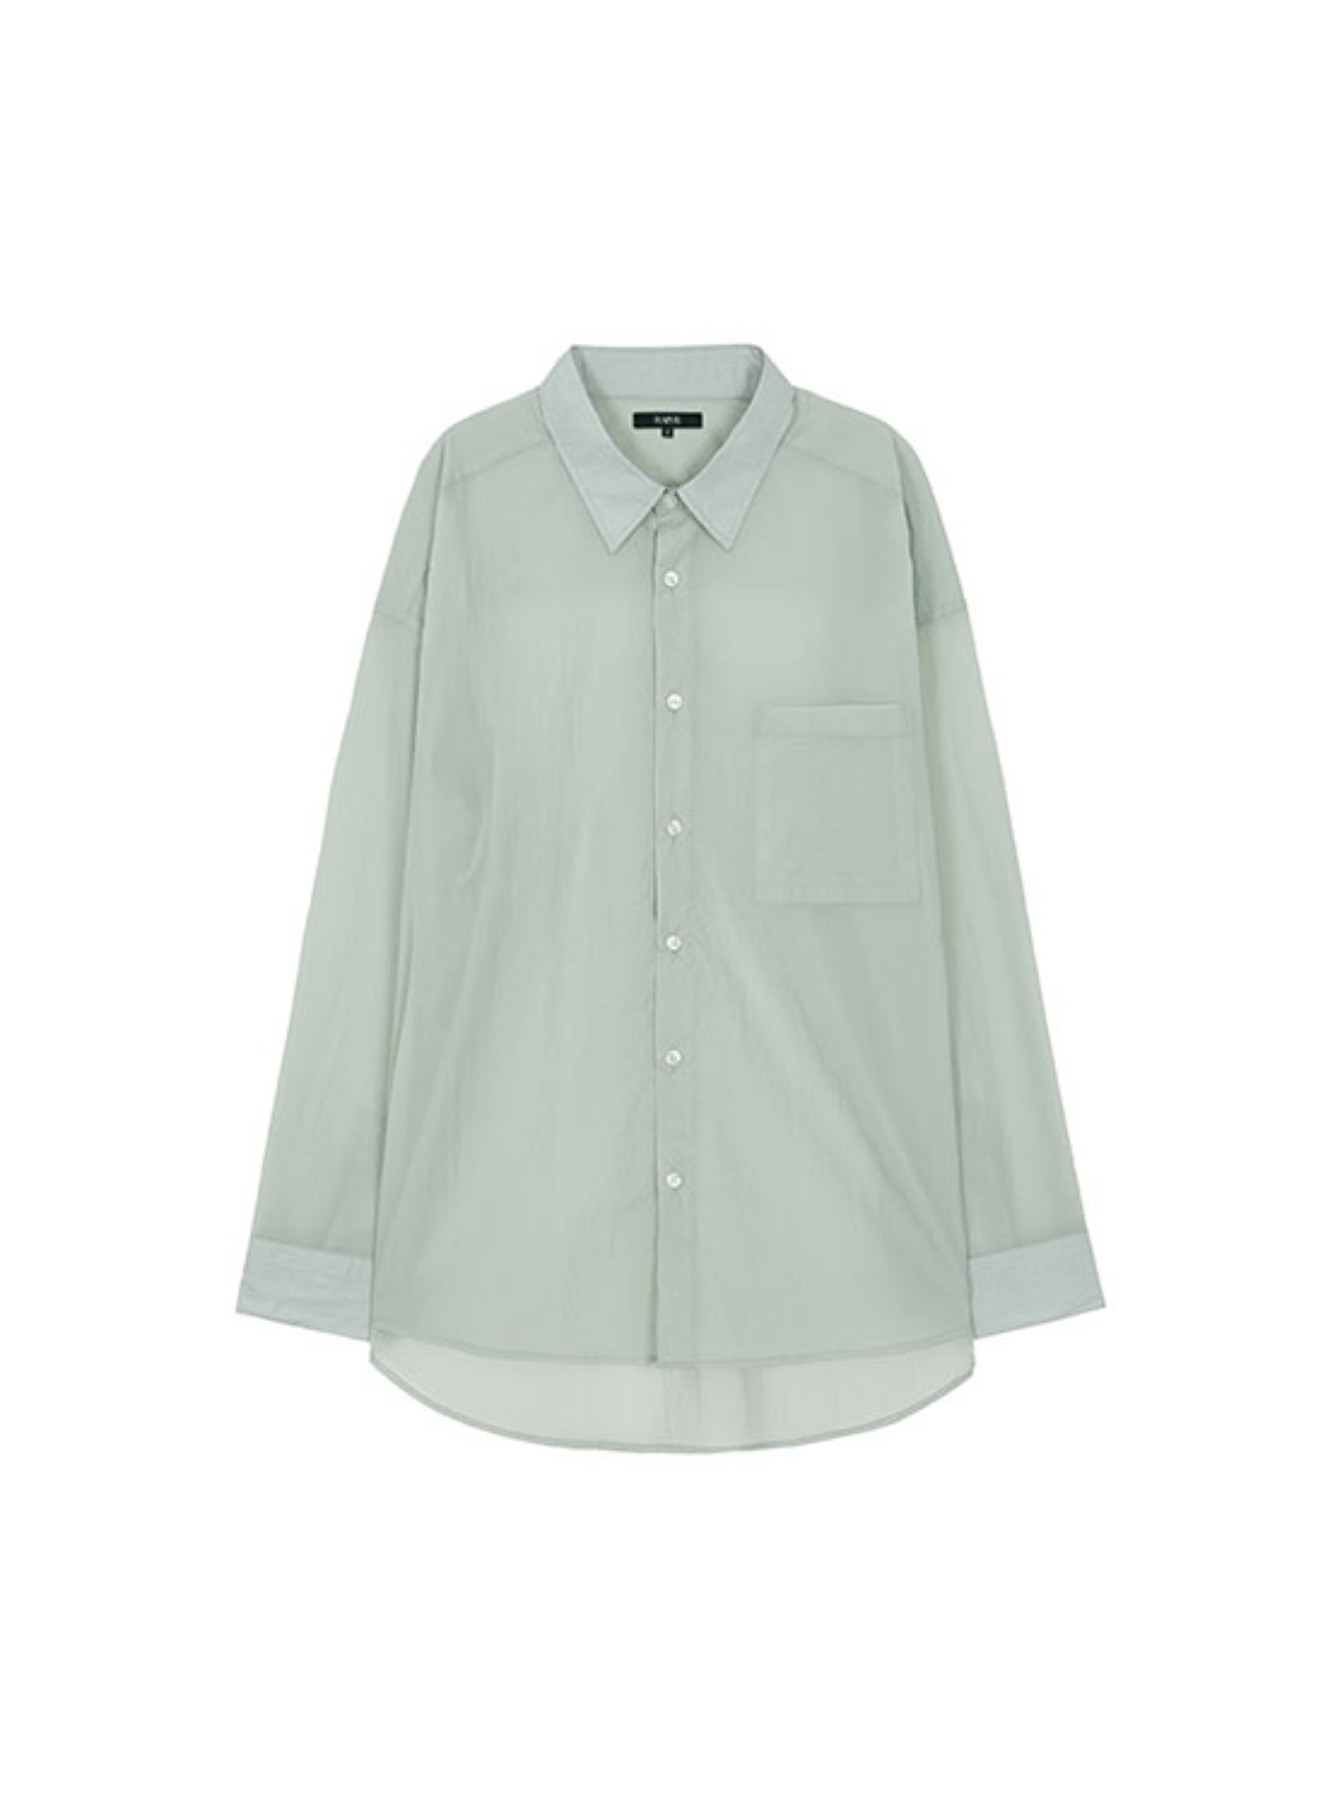 See through Basic Shirt in Mint VW2MB800-31